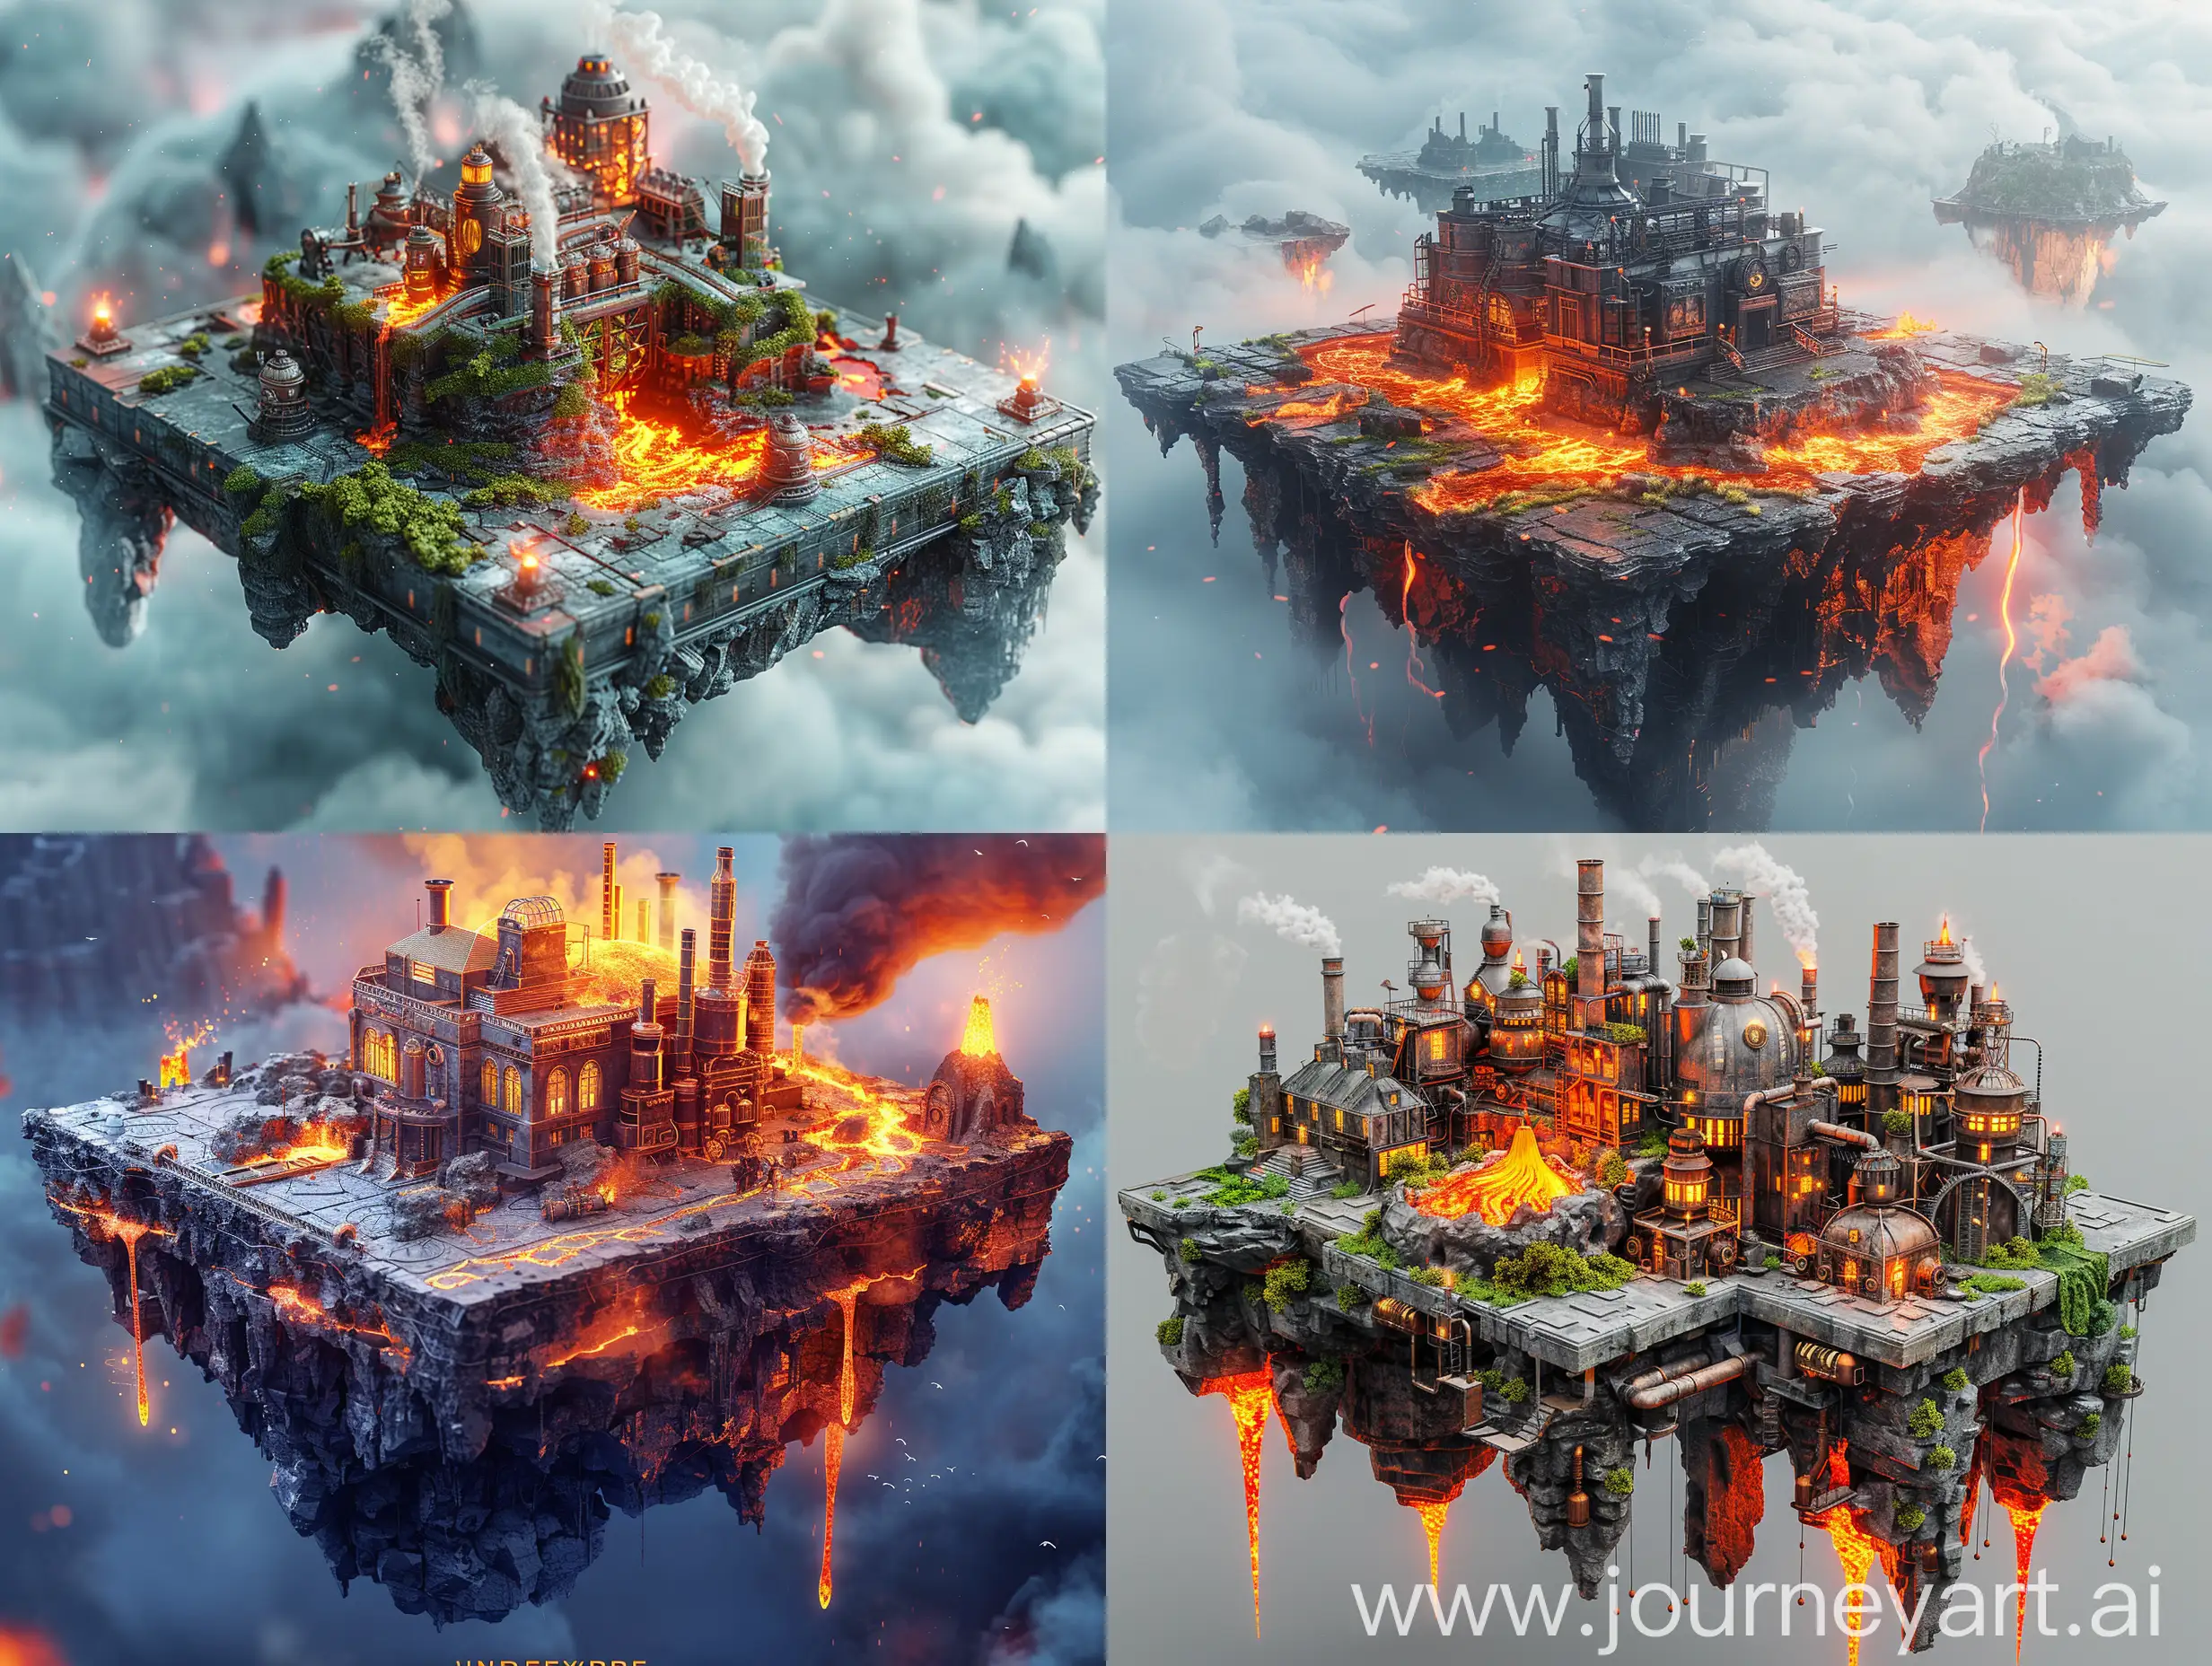 Floating island, Modern equivalence，A clean background， On a square platform， The platform is made of Steampunk Factory， There are volcanic eruptions, Ruins，Cliff，magma, Cube World， A clean background，Aerial view C4D，OC Renderer, Unreal Engine, Artistic, Movie Lighting, Award-winning --s 400